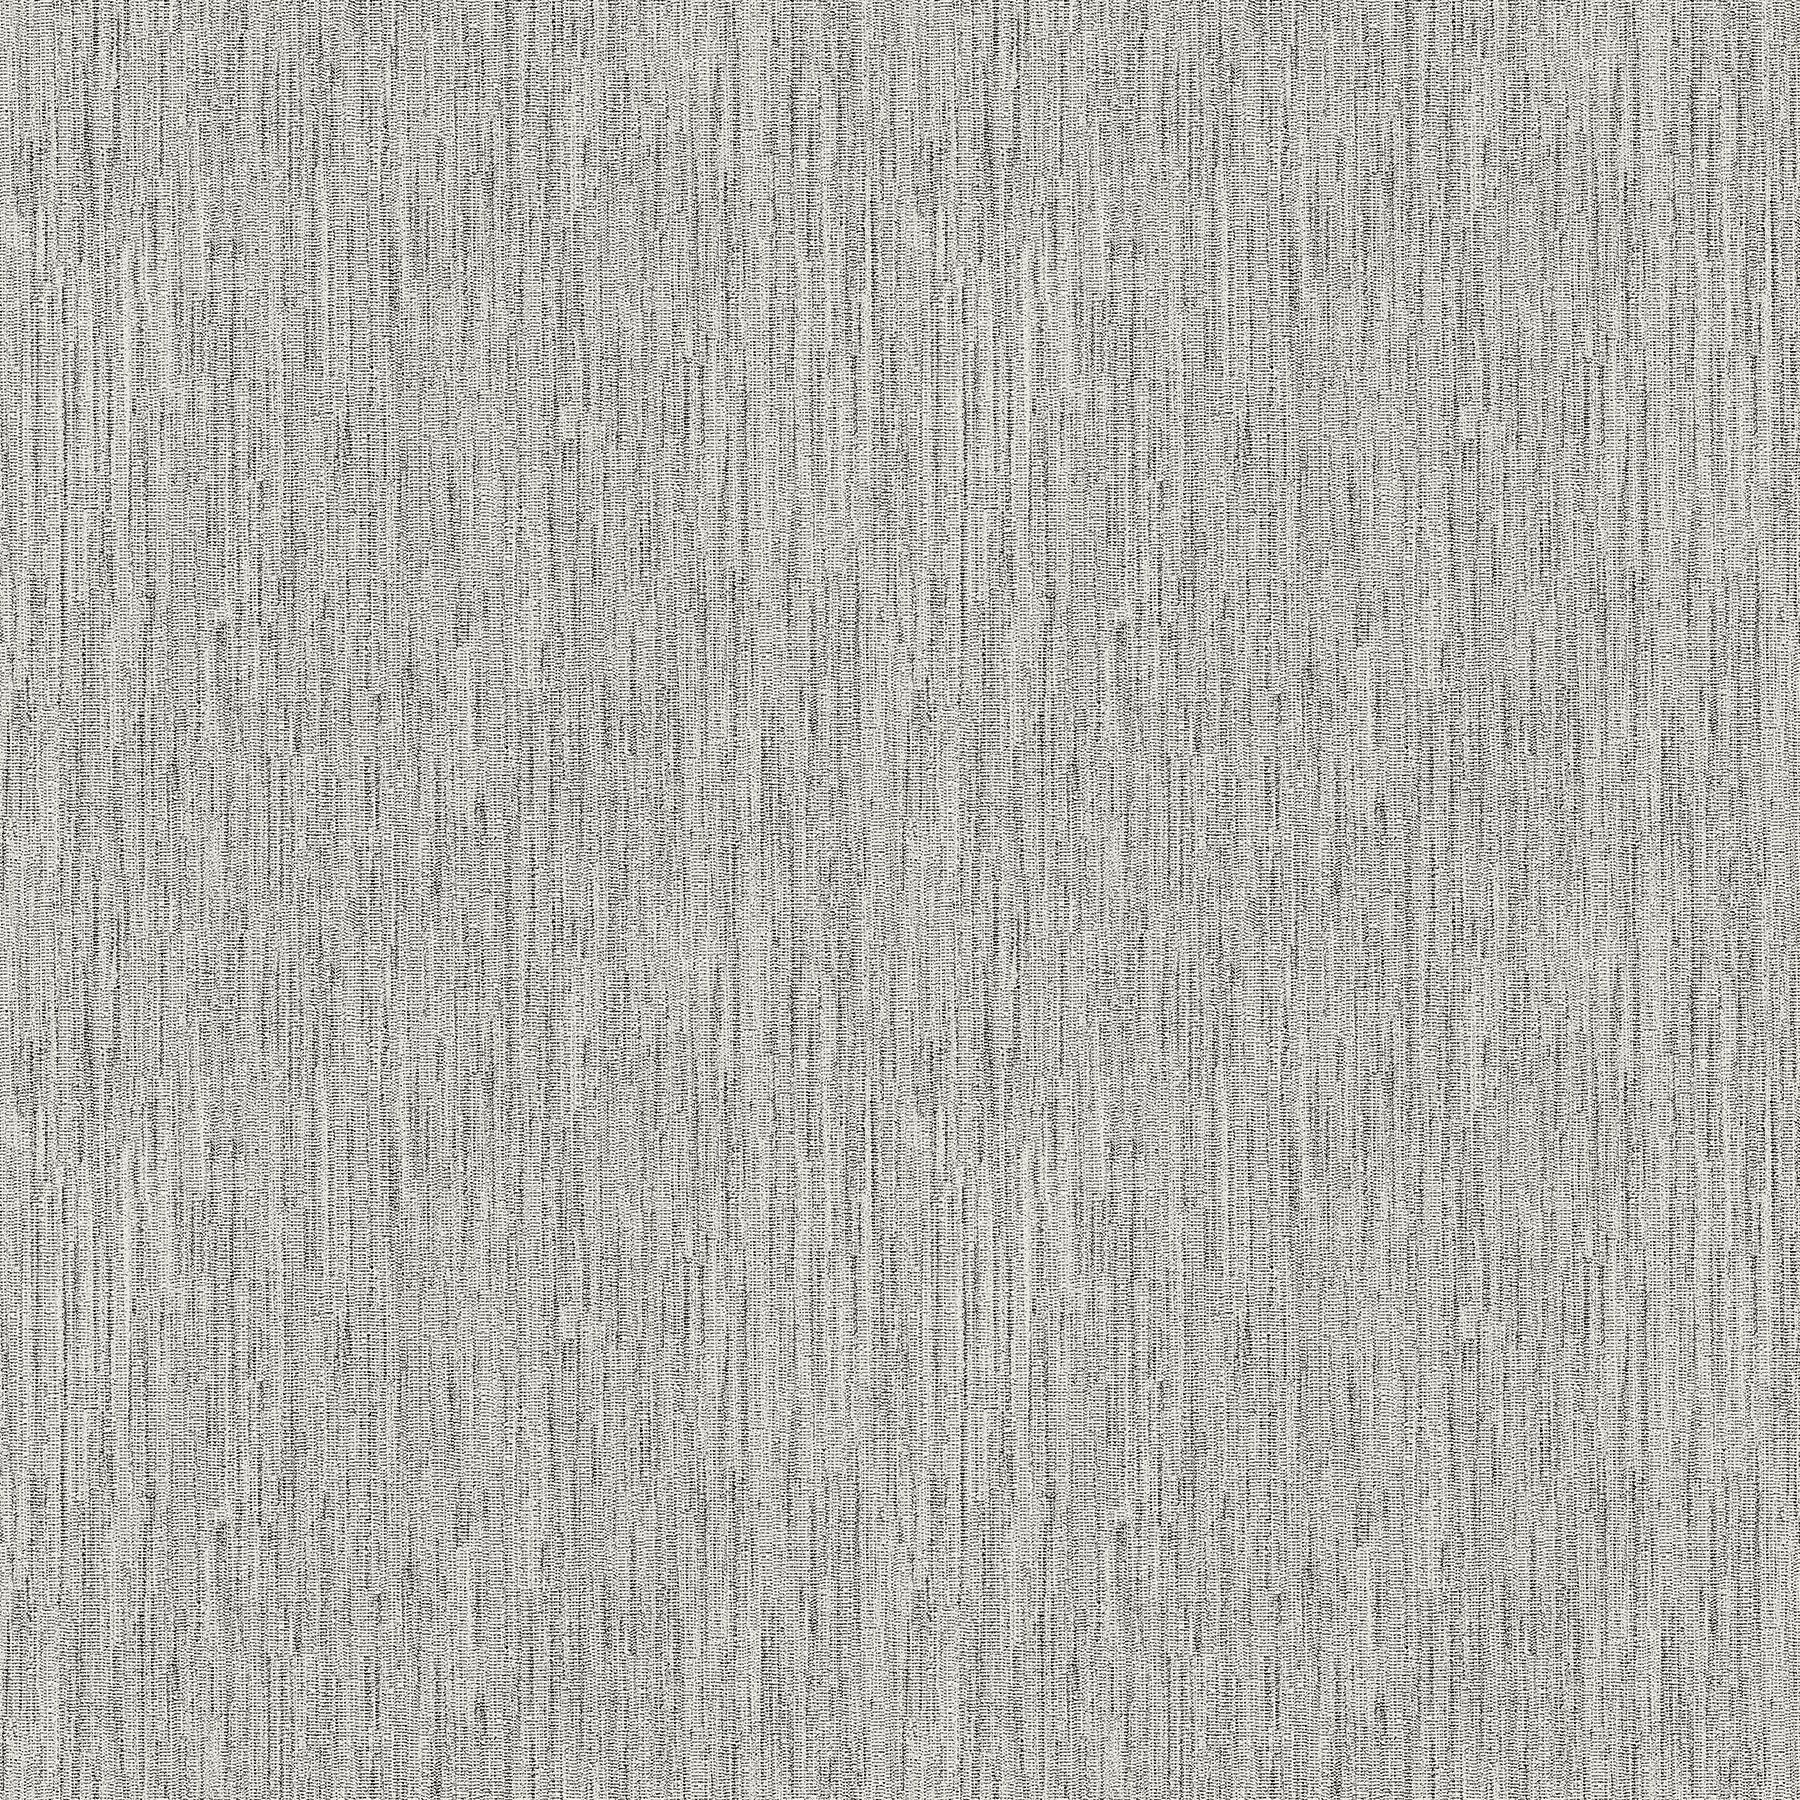 Save on 2971-86338 Dimensions Terence Grey Pinstripe Texture Grey A-Street Prints Wallpaper